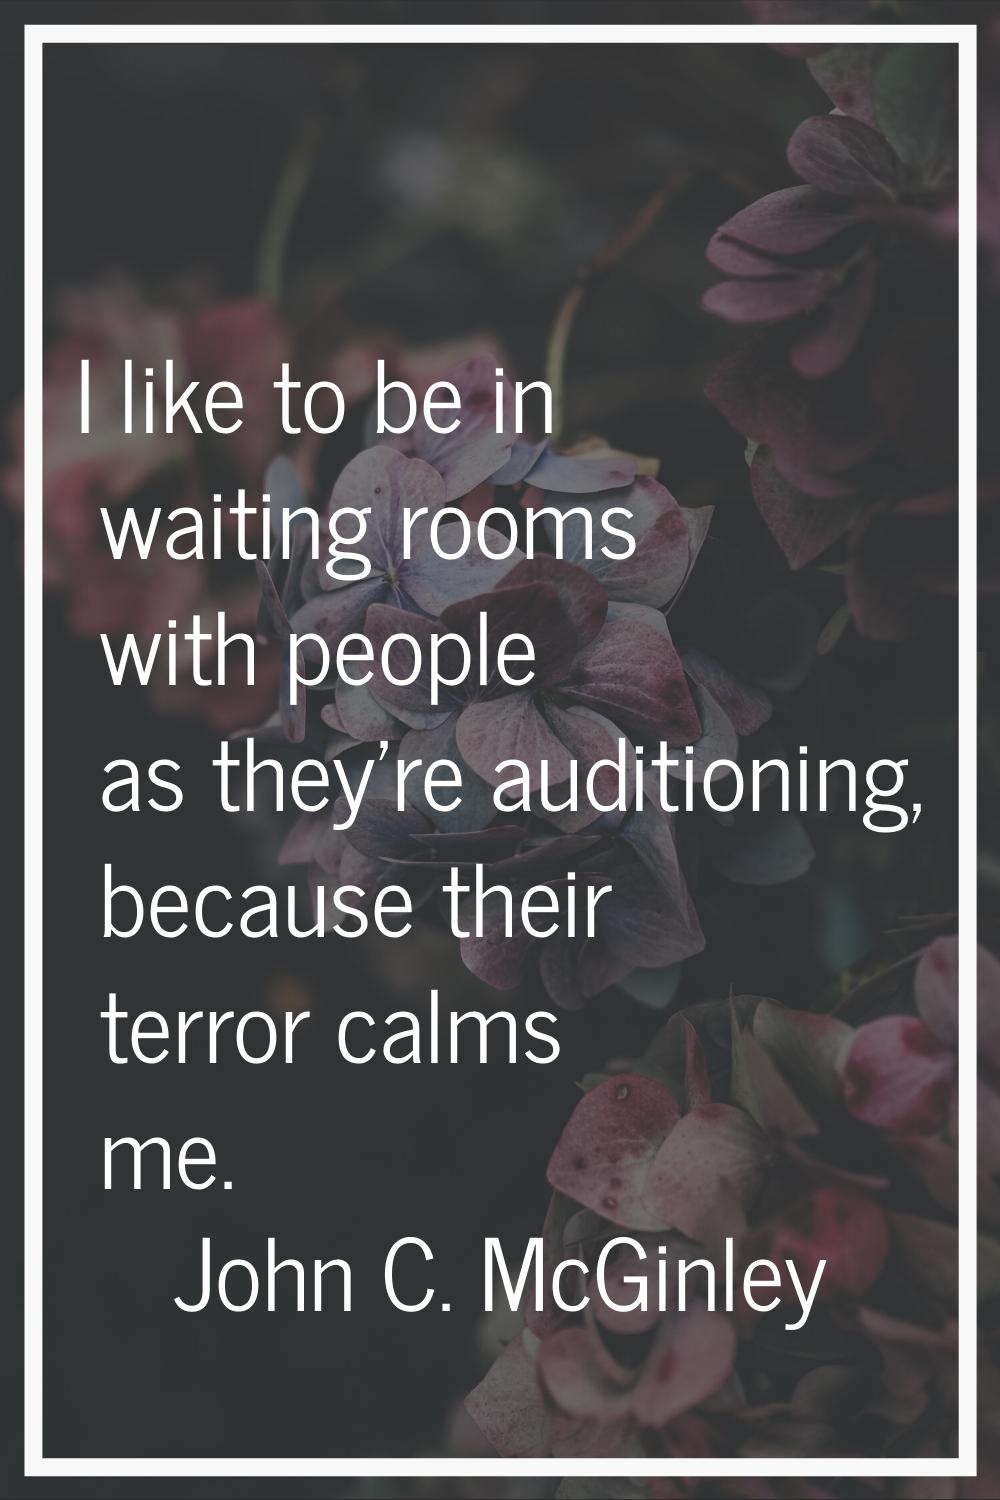 I like to be in waiting rooms with people as they're auditioning, because their terror calms me.